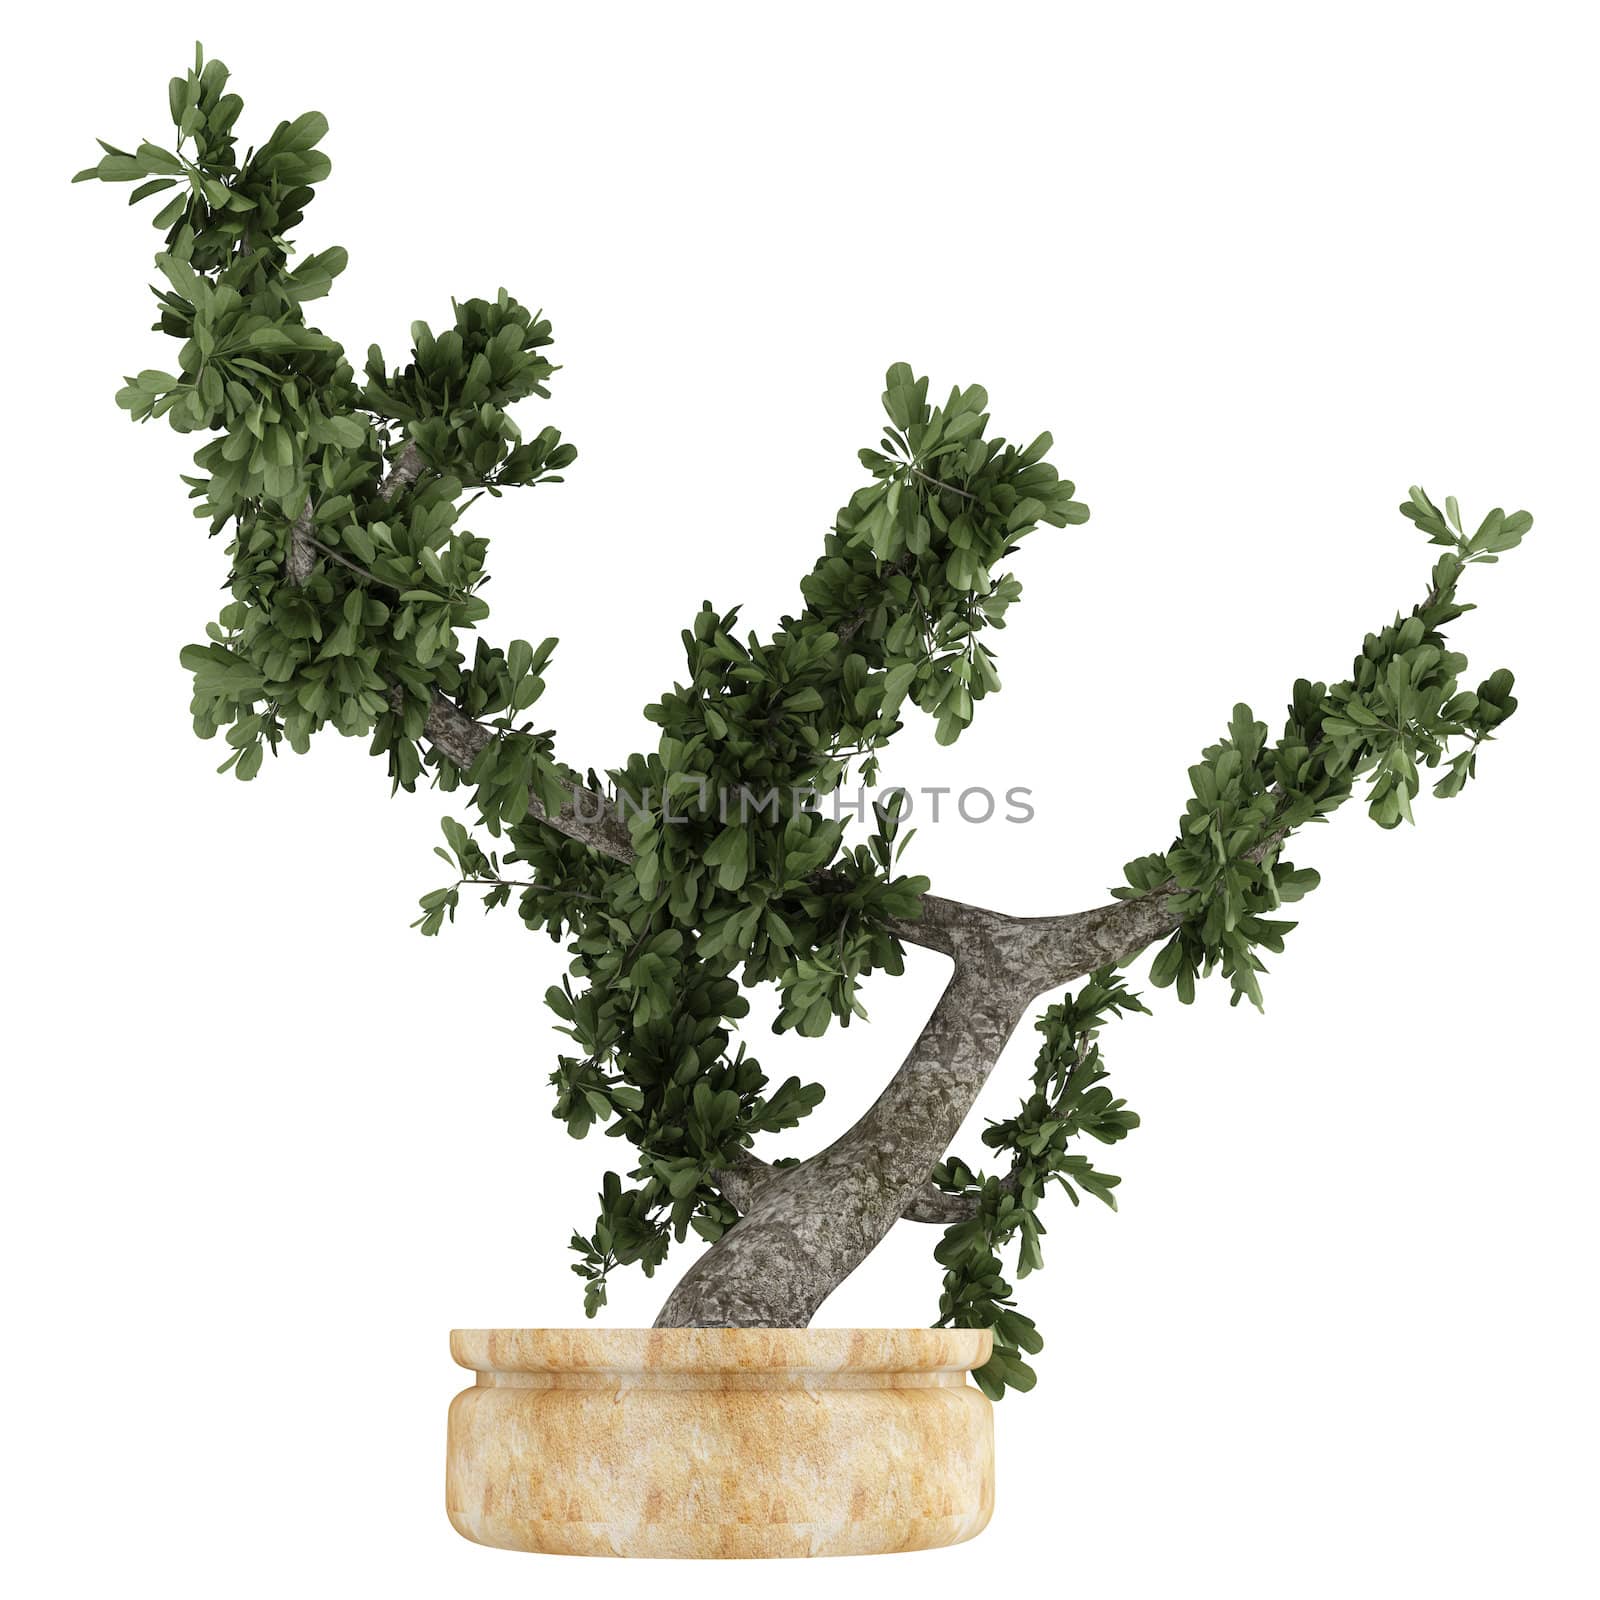 Bonsai tree in a pot isolated on white background